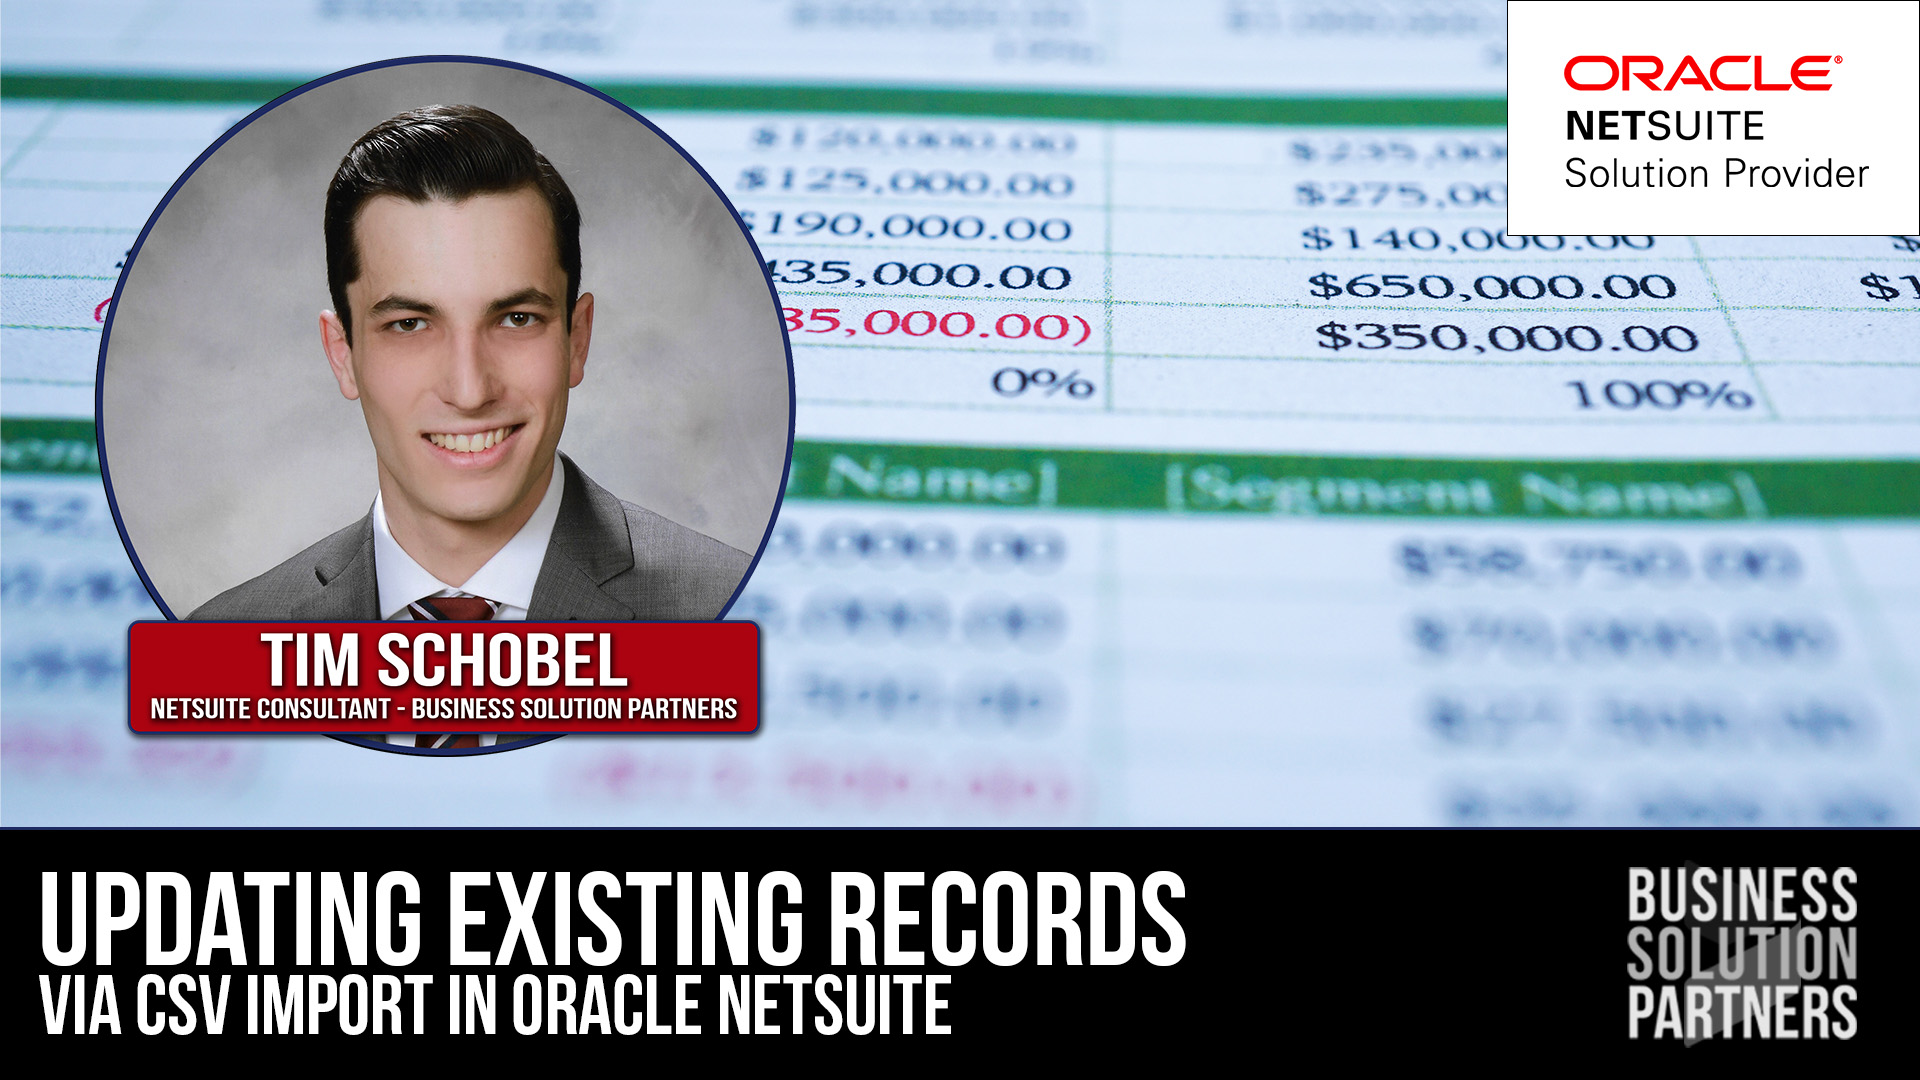 Updating Existing Records via CSV Import in Oracle NetSuite - A Tutorial